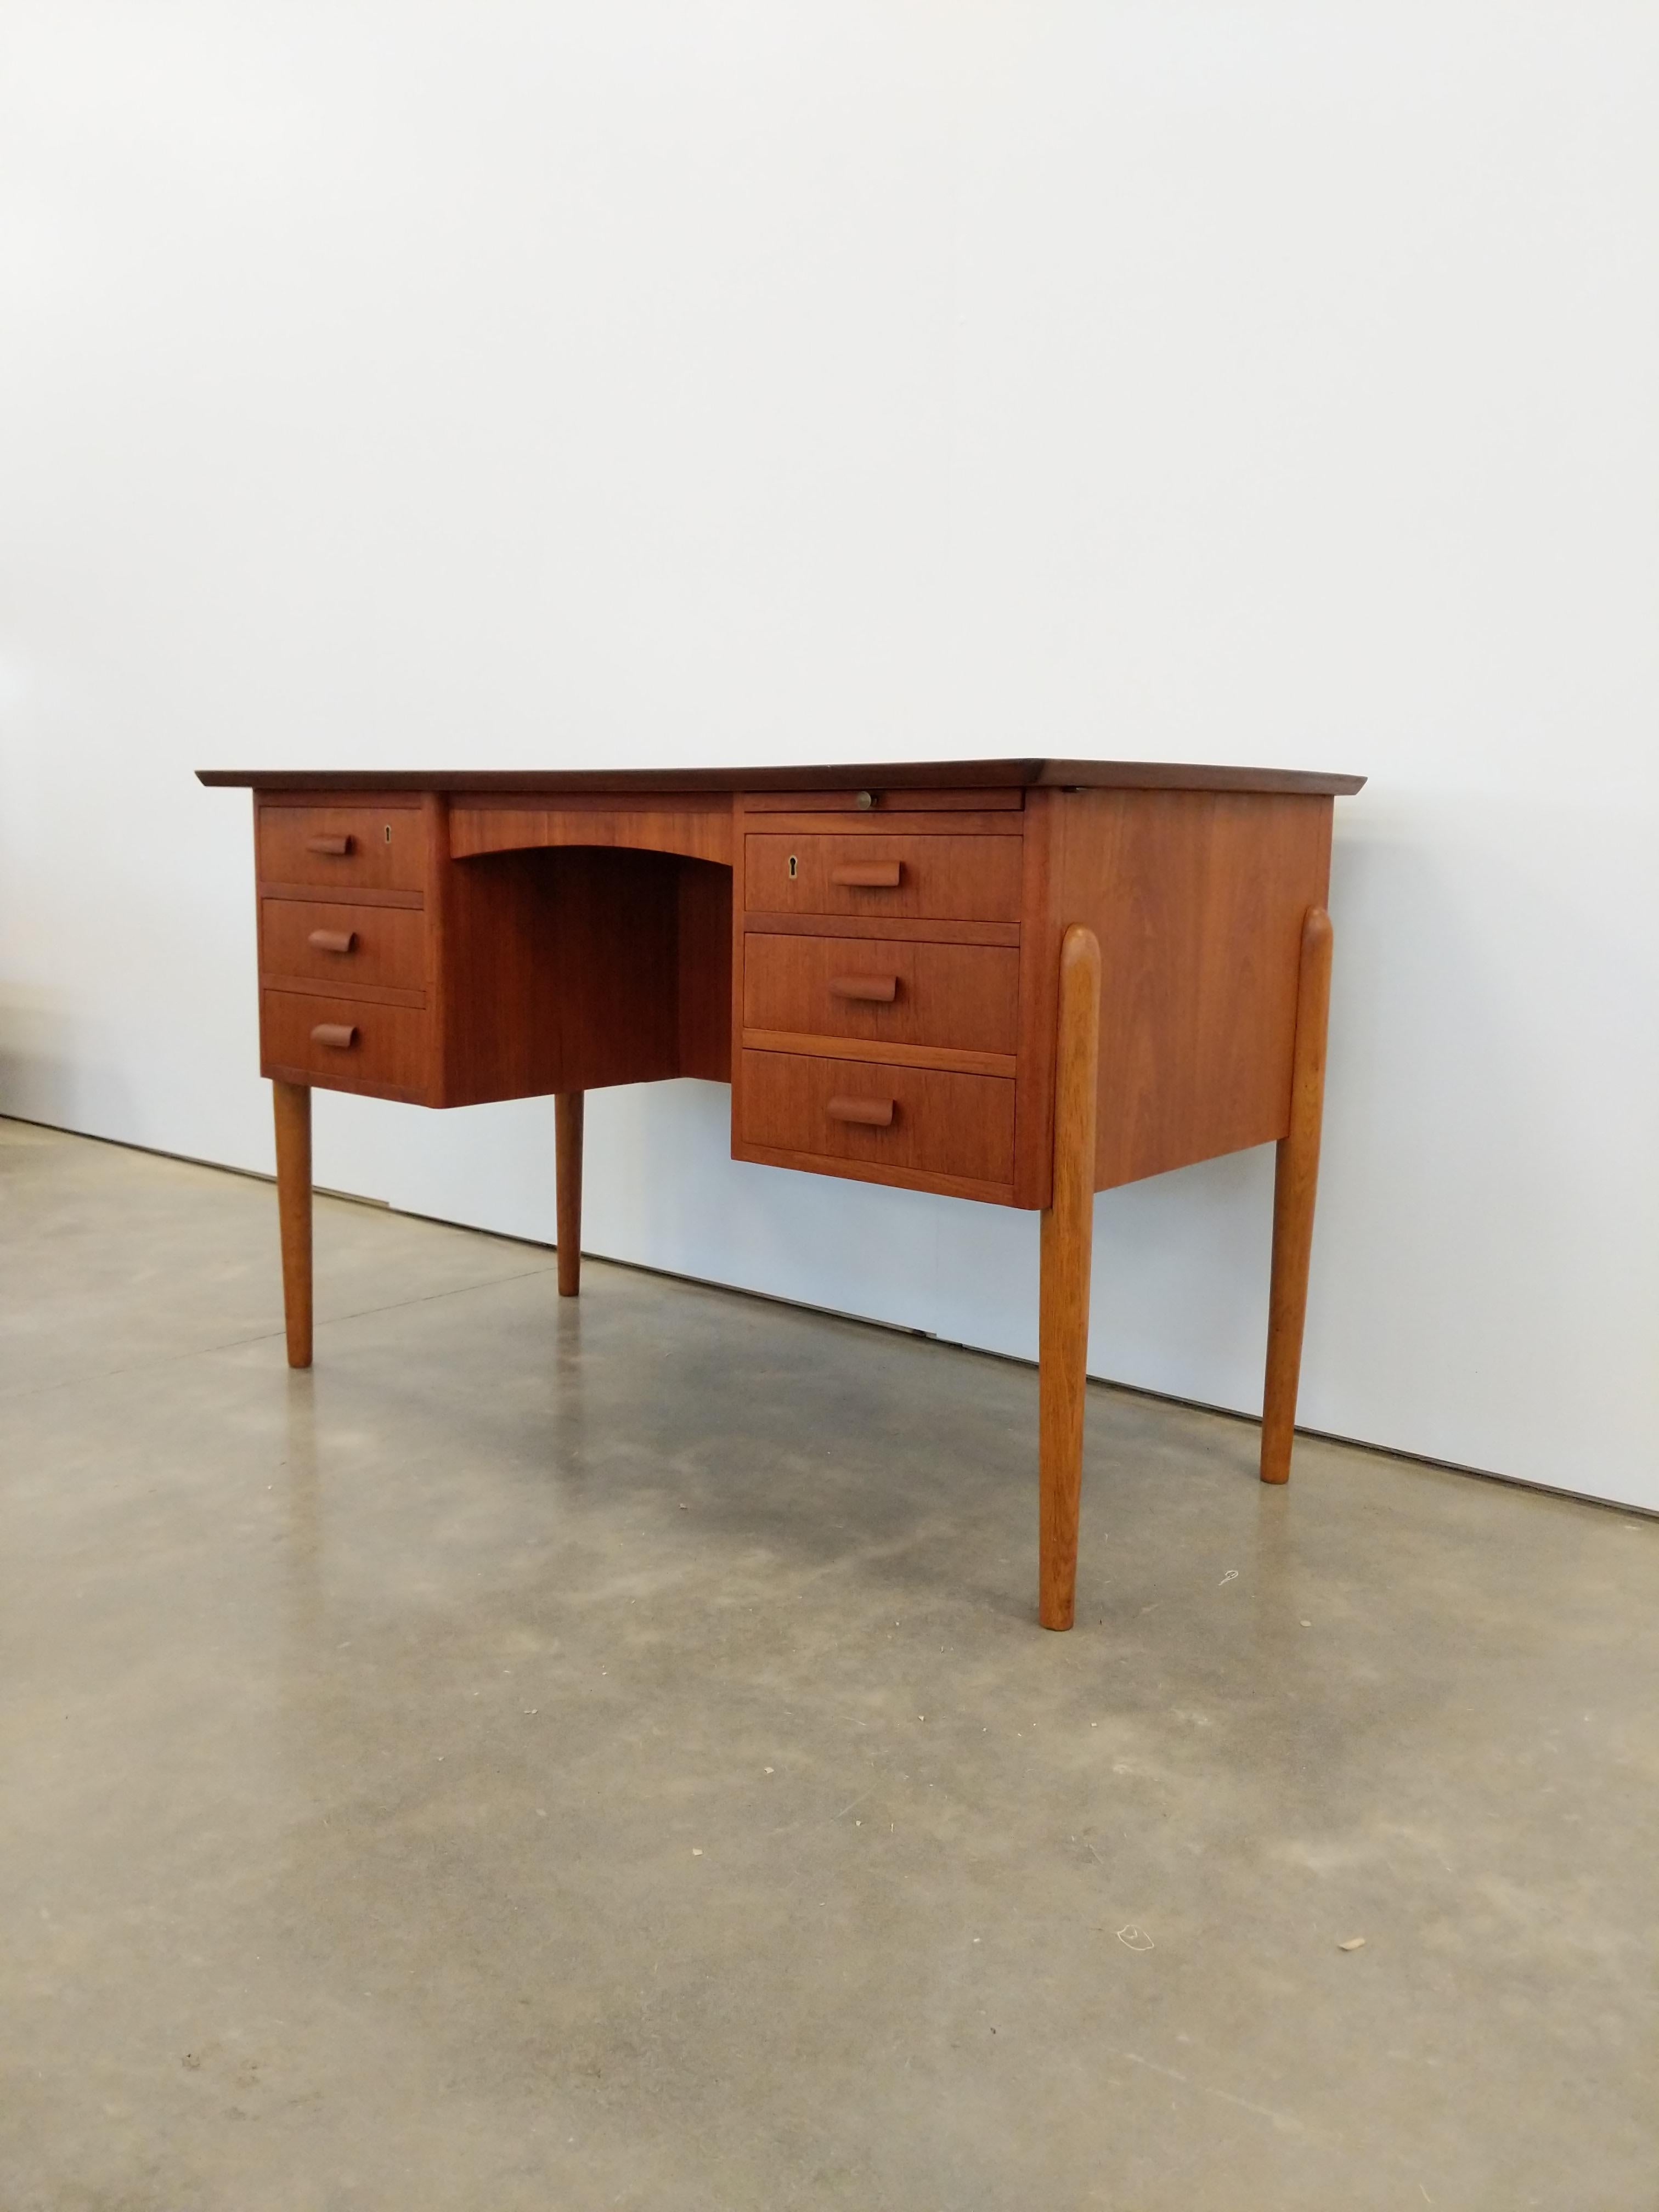 Authentic vintage mid century Danish / Scandinavian Modern teak desk.

This piece is in excellent refinished condition with few signs of age-related wear (see photos).

If you would like any additional details, please contact us.

Dimensions:
29.25